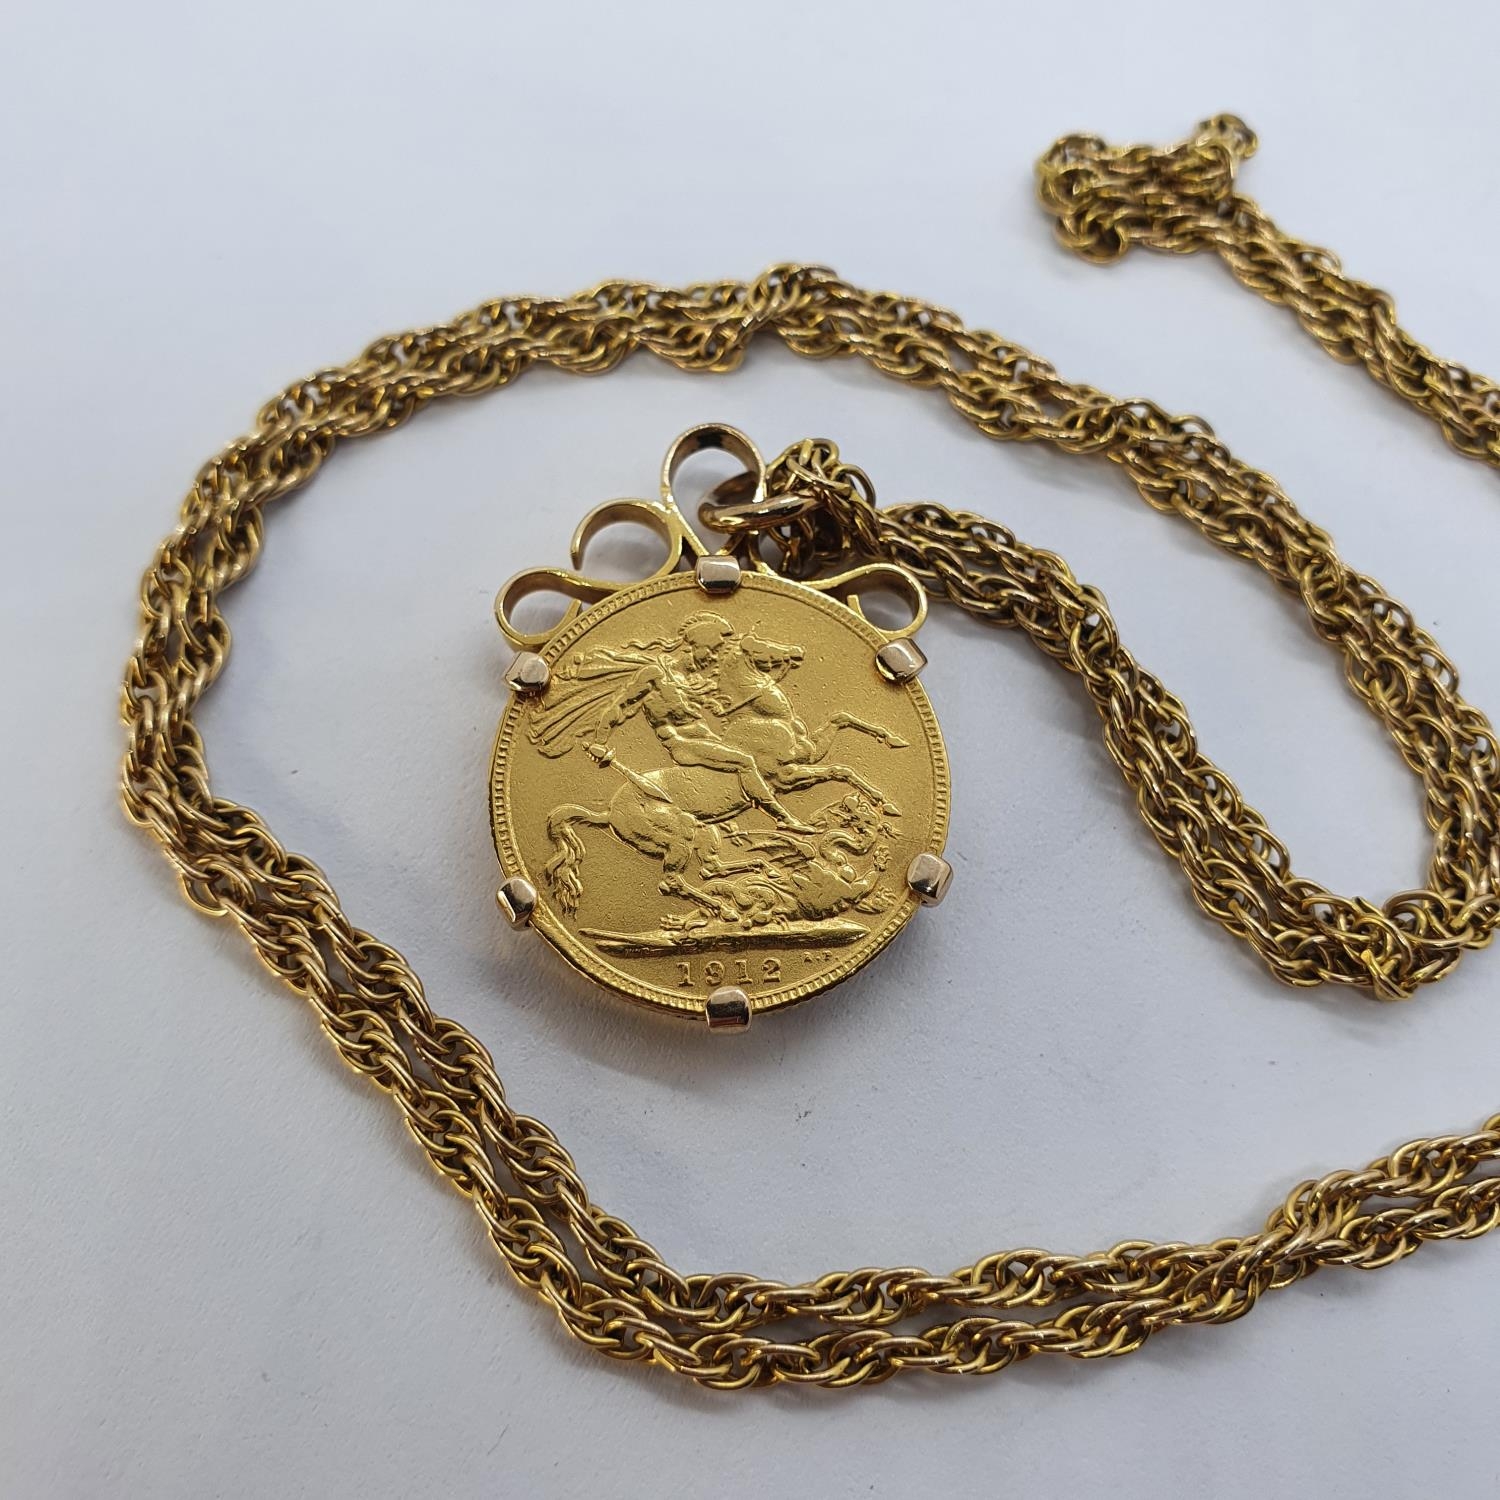 A George V sovereign, 1912, mounted as a pendant, on a chain